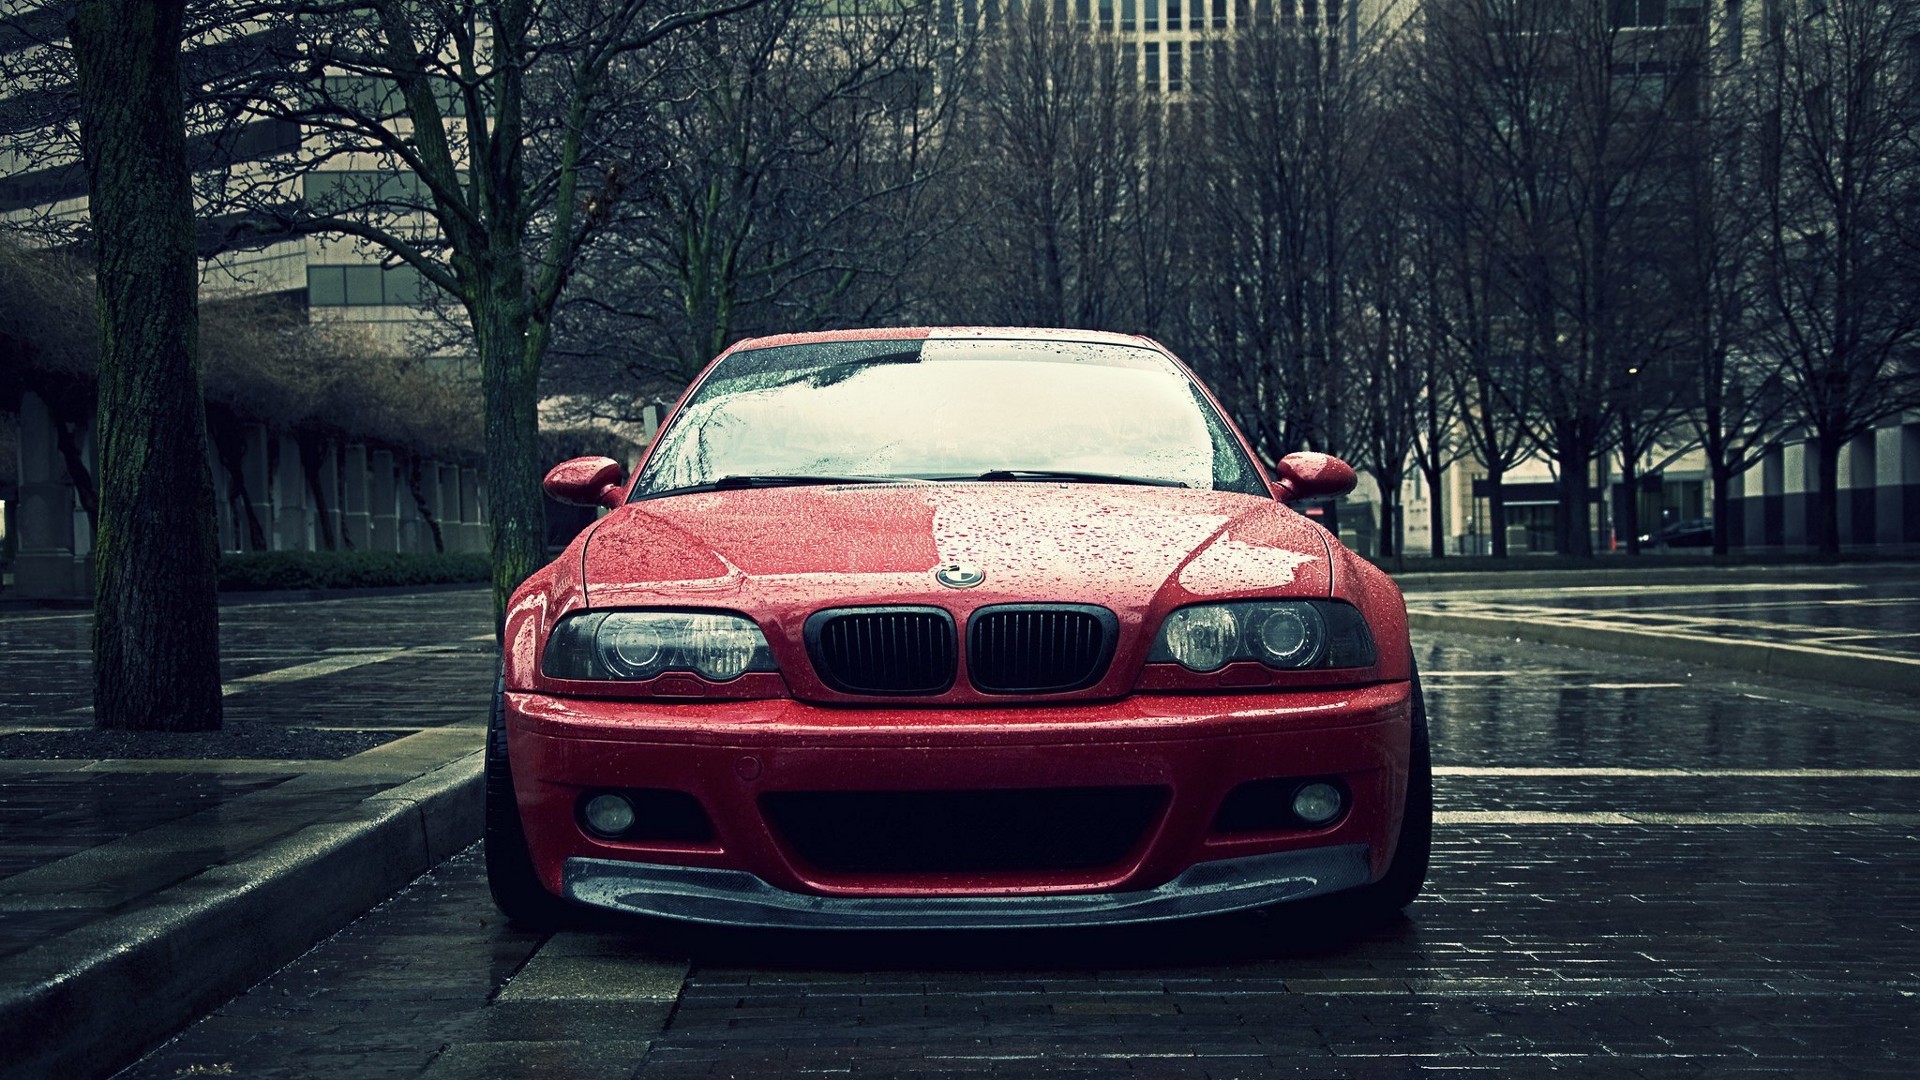 Car Bmw Rain City Wallpapers Hd Desktop And Mobile Backgrounds